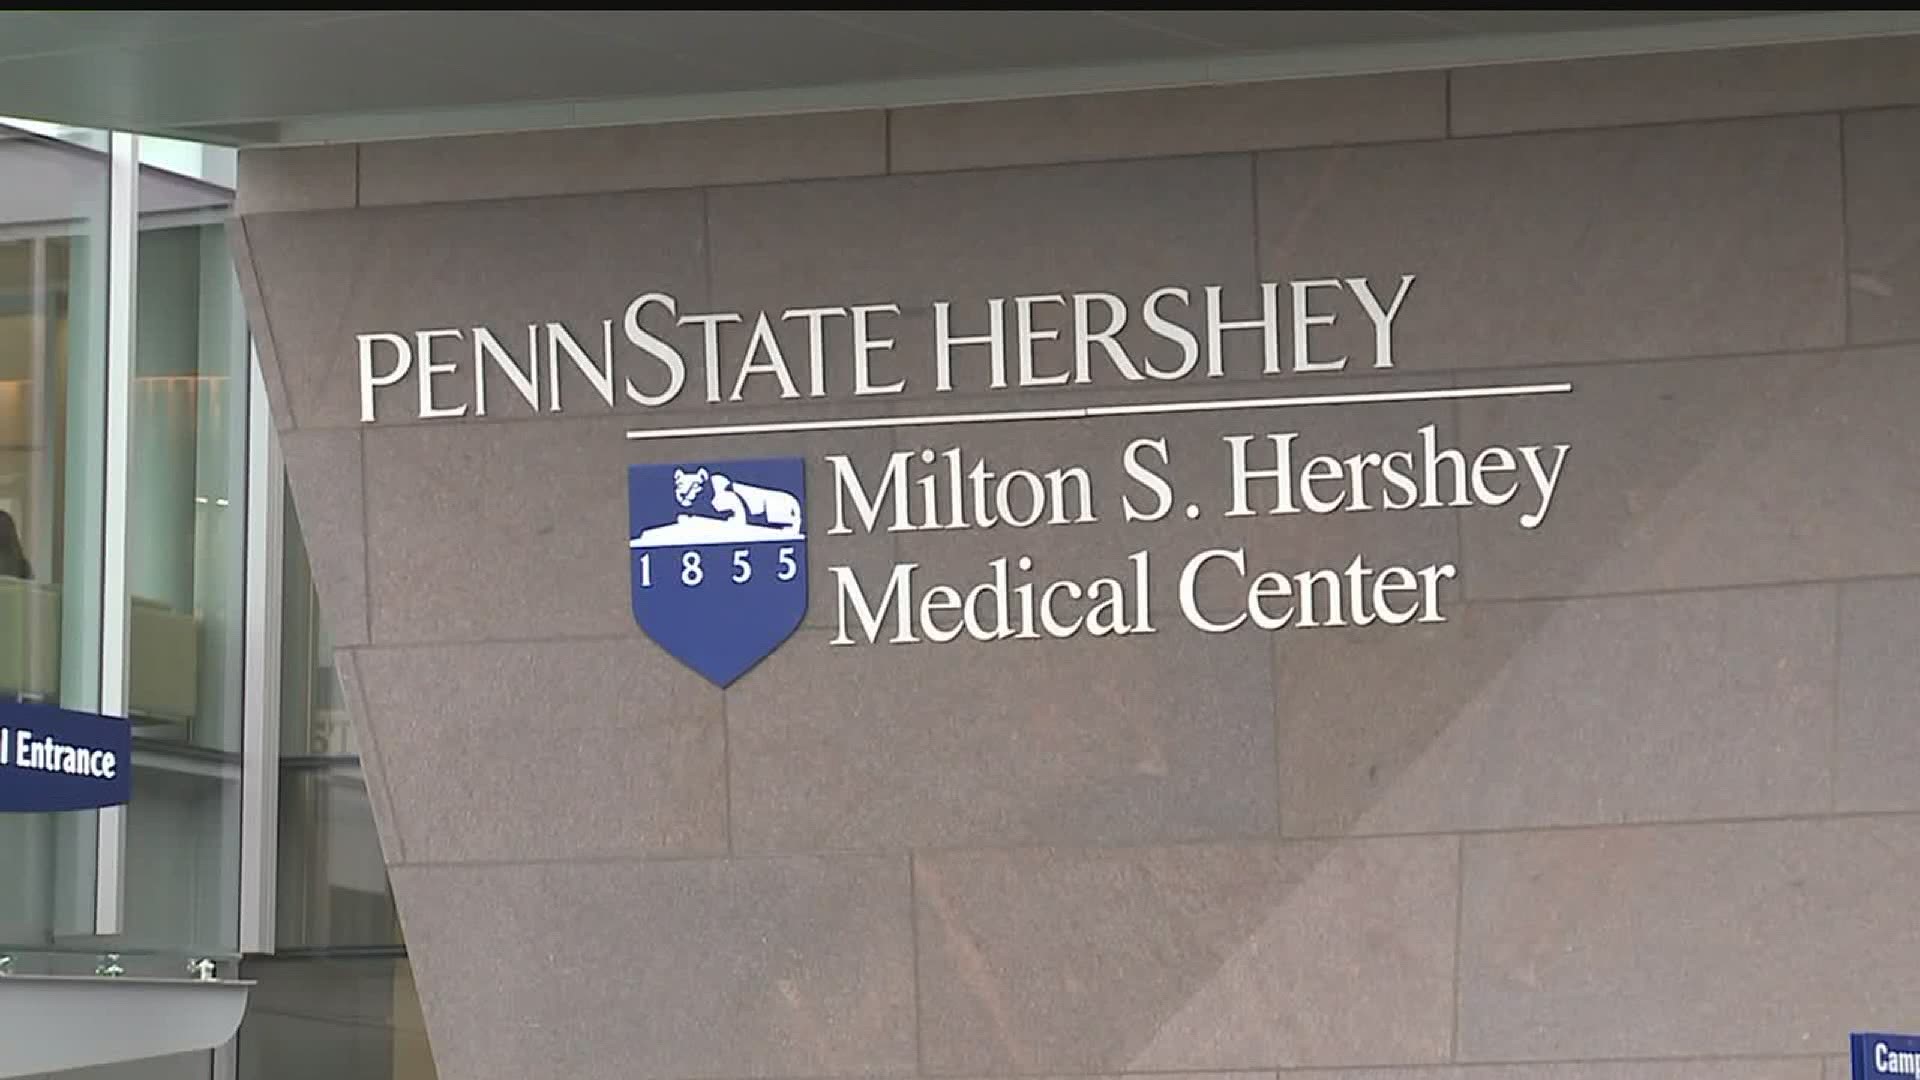 Penn State Health has seen a decrease in emergency patients out of fear of COVID-19, and people are putting themselves at risk for more damage by not going.